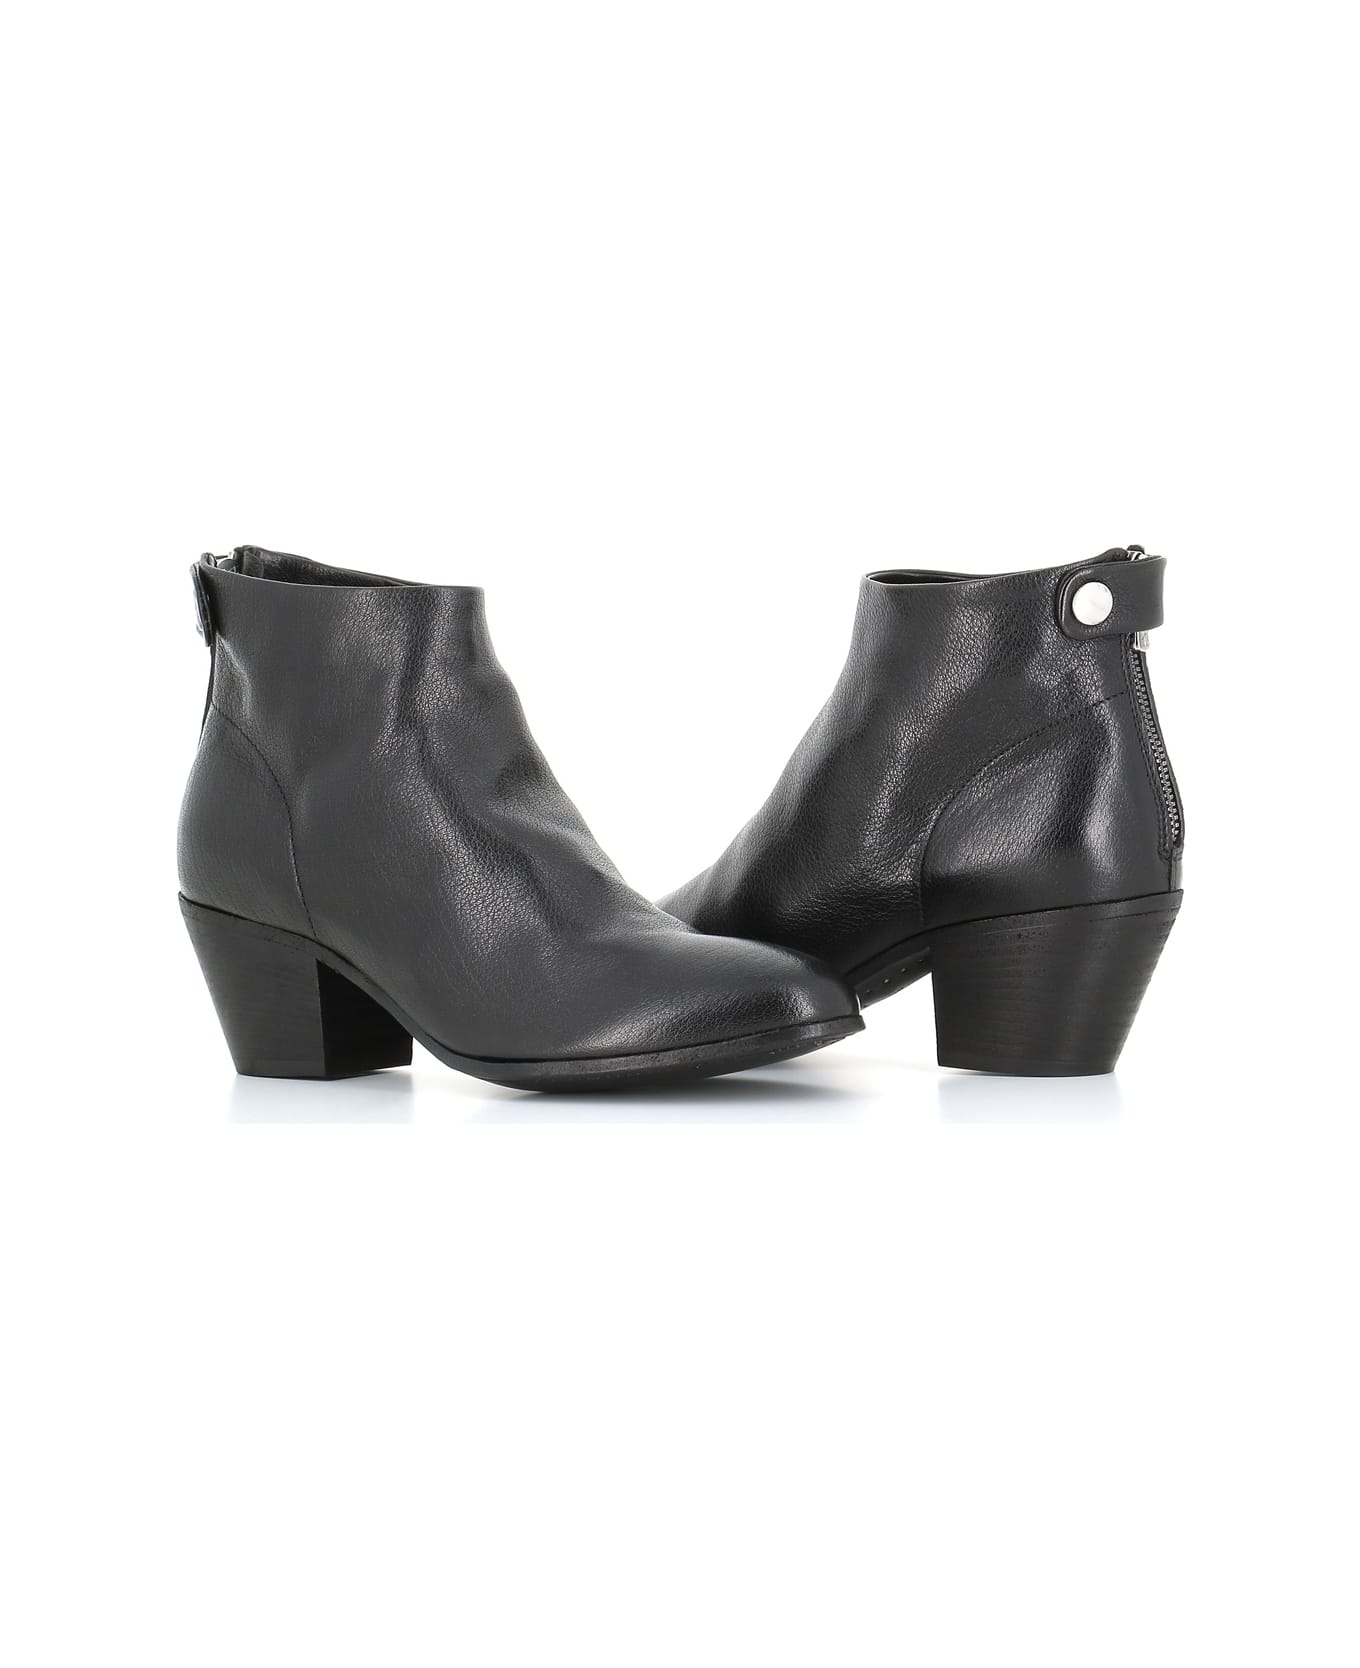 Officine Creative Ankle Boot Shirlee/003 - Black ブーツ